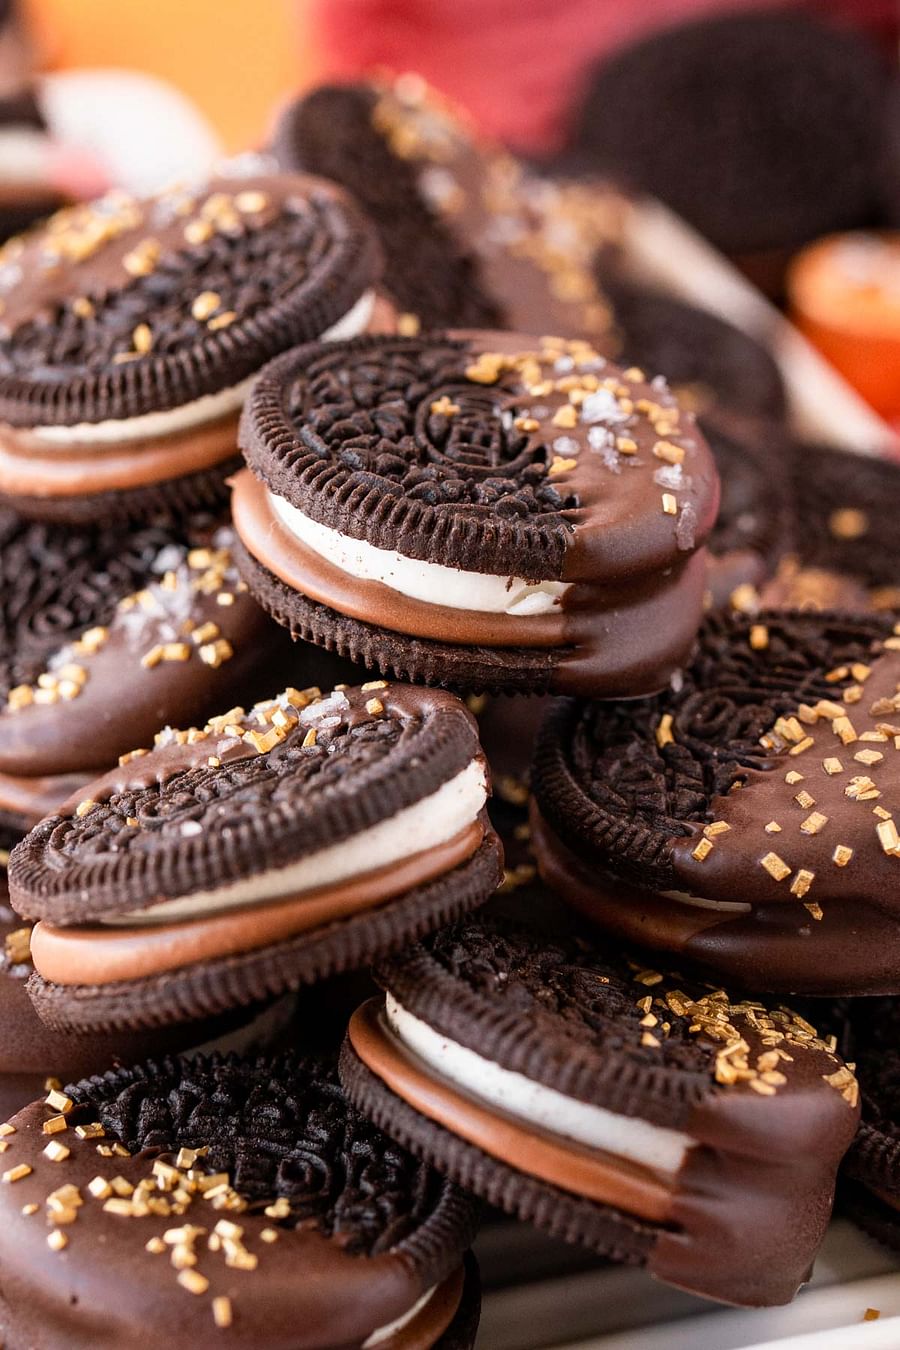 Step-by-step process of coating Oreos in chocolate